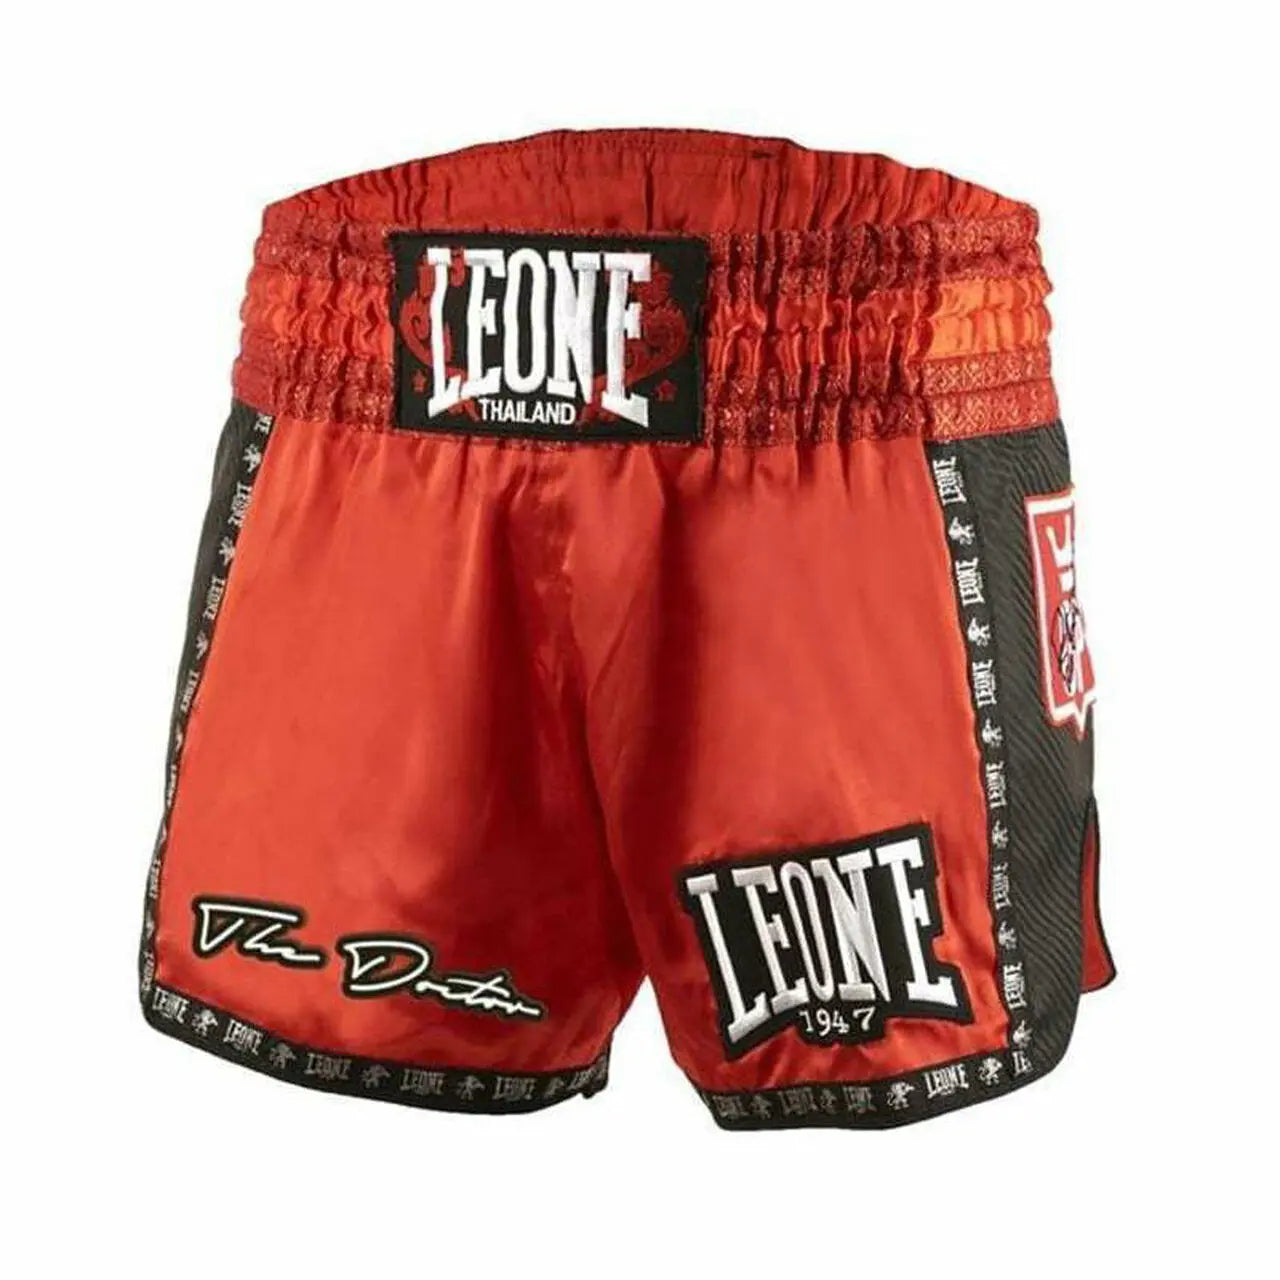 Leone K1 Boxing Gloves and Fight Shorts from Fight Co